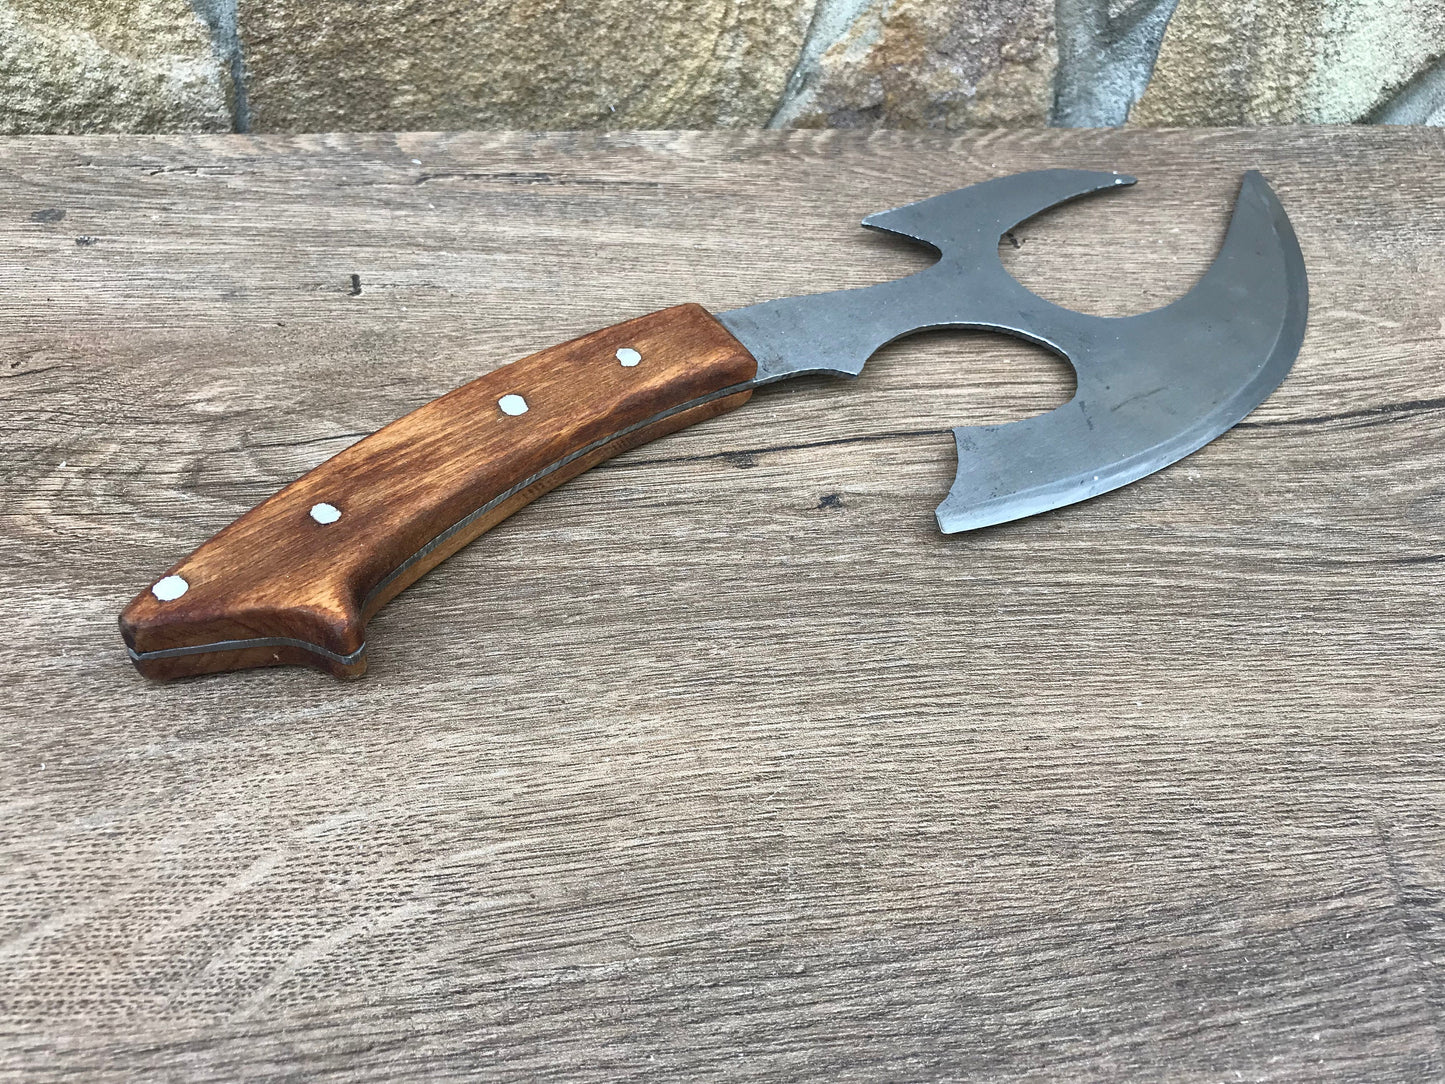 Kitchen knife, kitchen axe, viking knife, viking axe, axe, kitchen hatchet, knife, iron gifts, manly gift,mens gift,culinary knife,BBQ knife